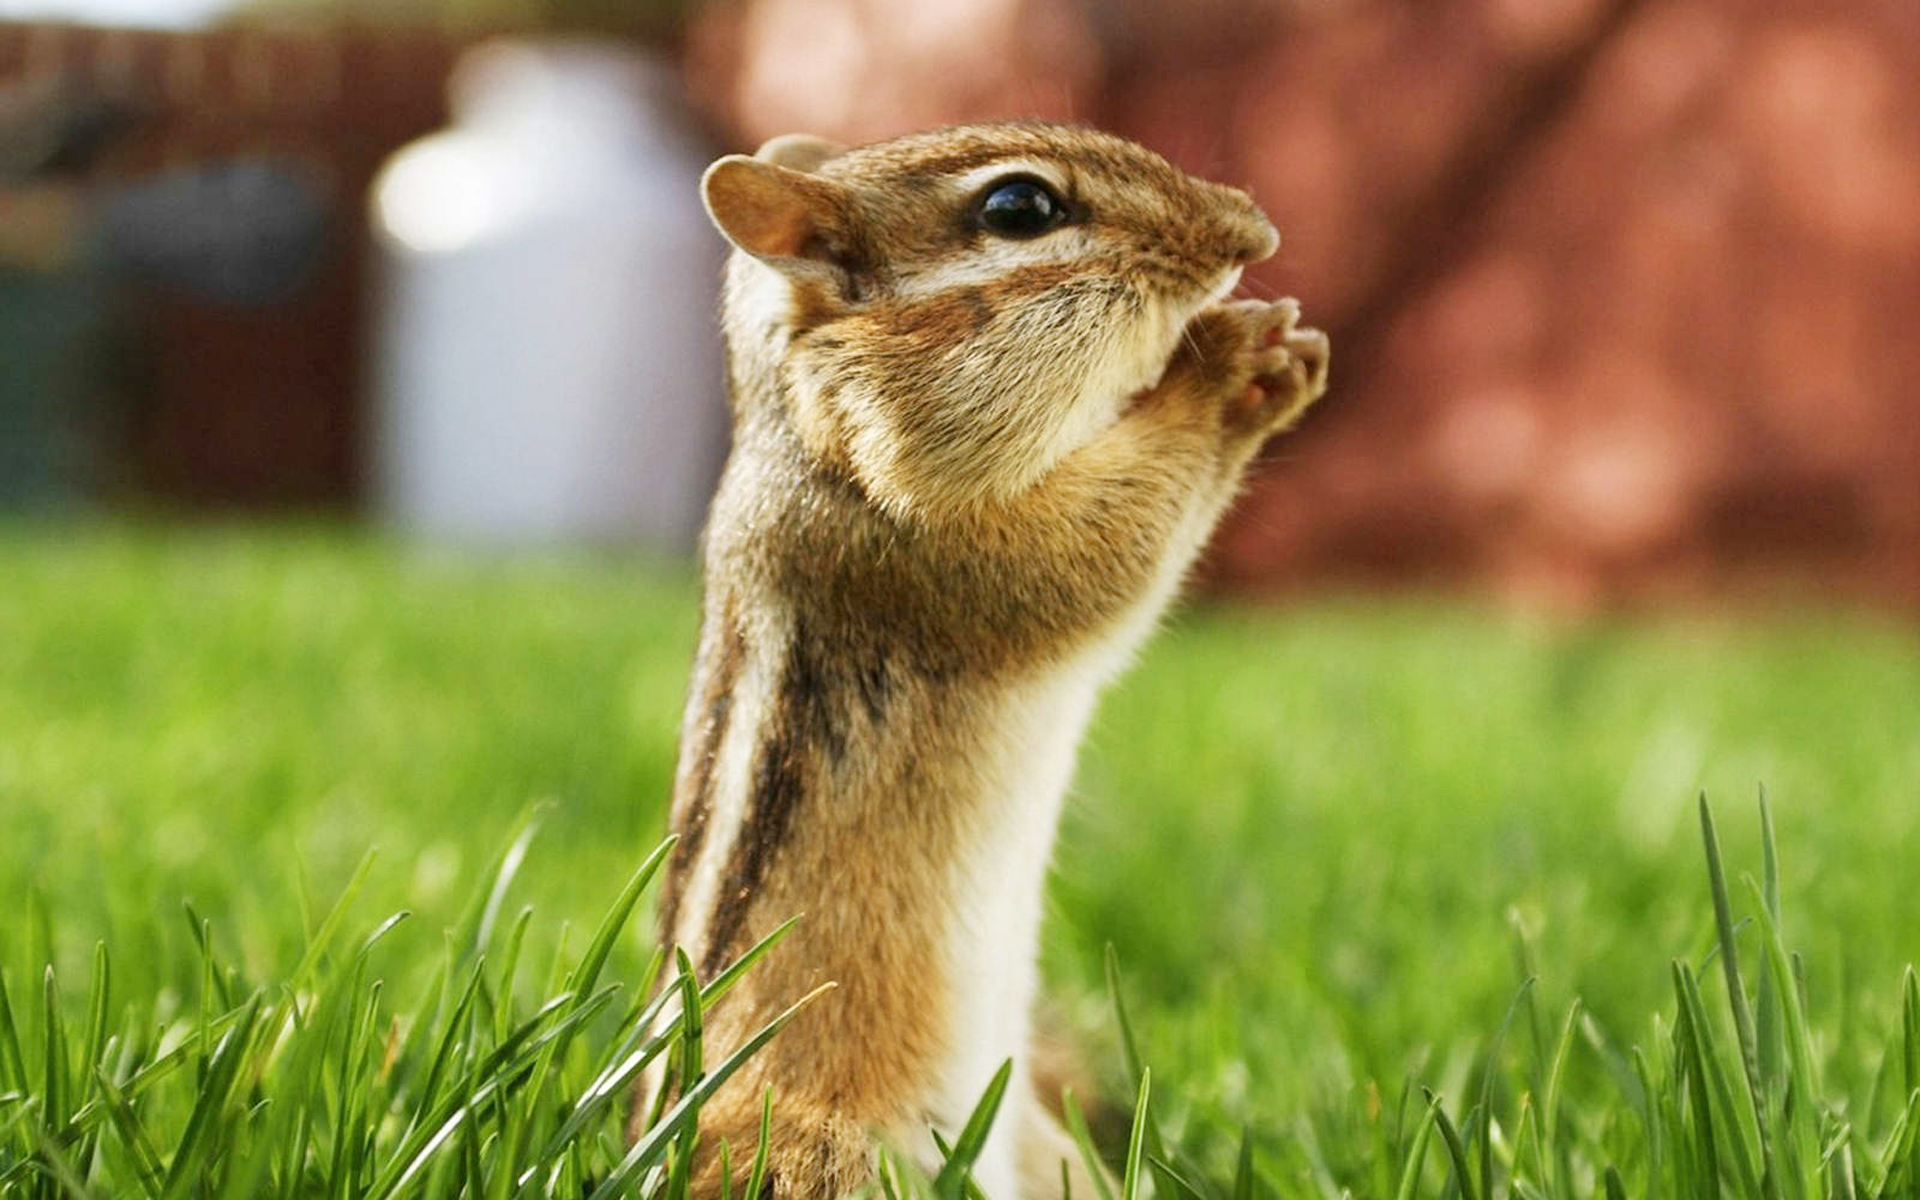 Fascinating Animal Wallpapers: Marvelous Cute Little Squirrel Pray To God On The Green Grass Blur Backgrounds Wallpapers 1920x1200px